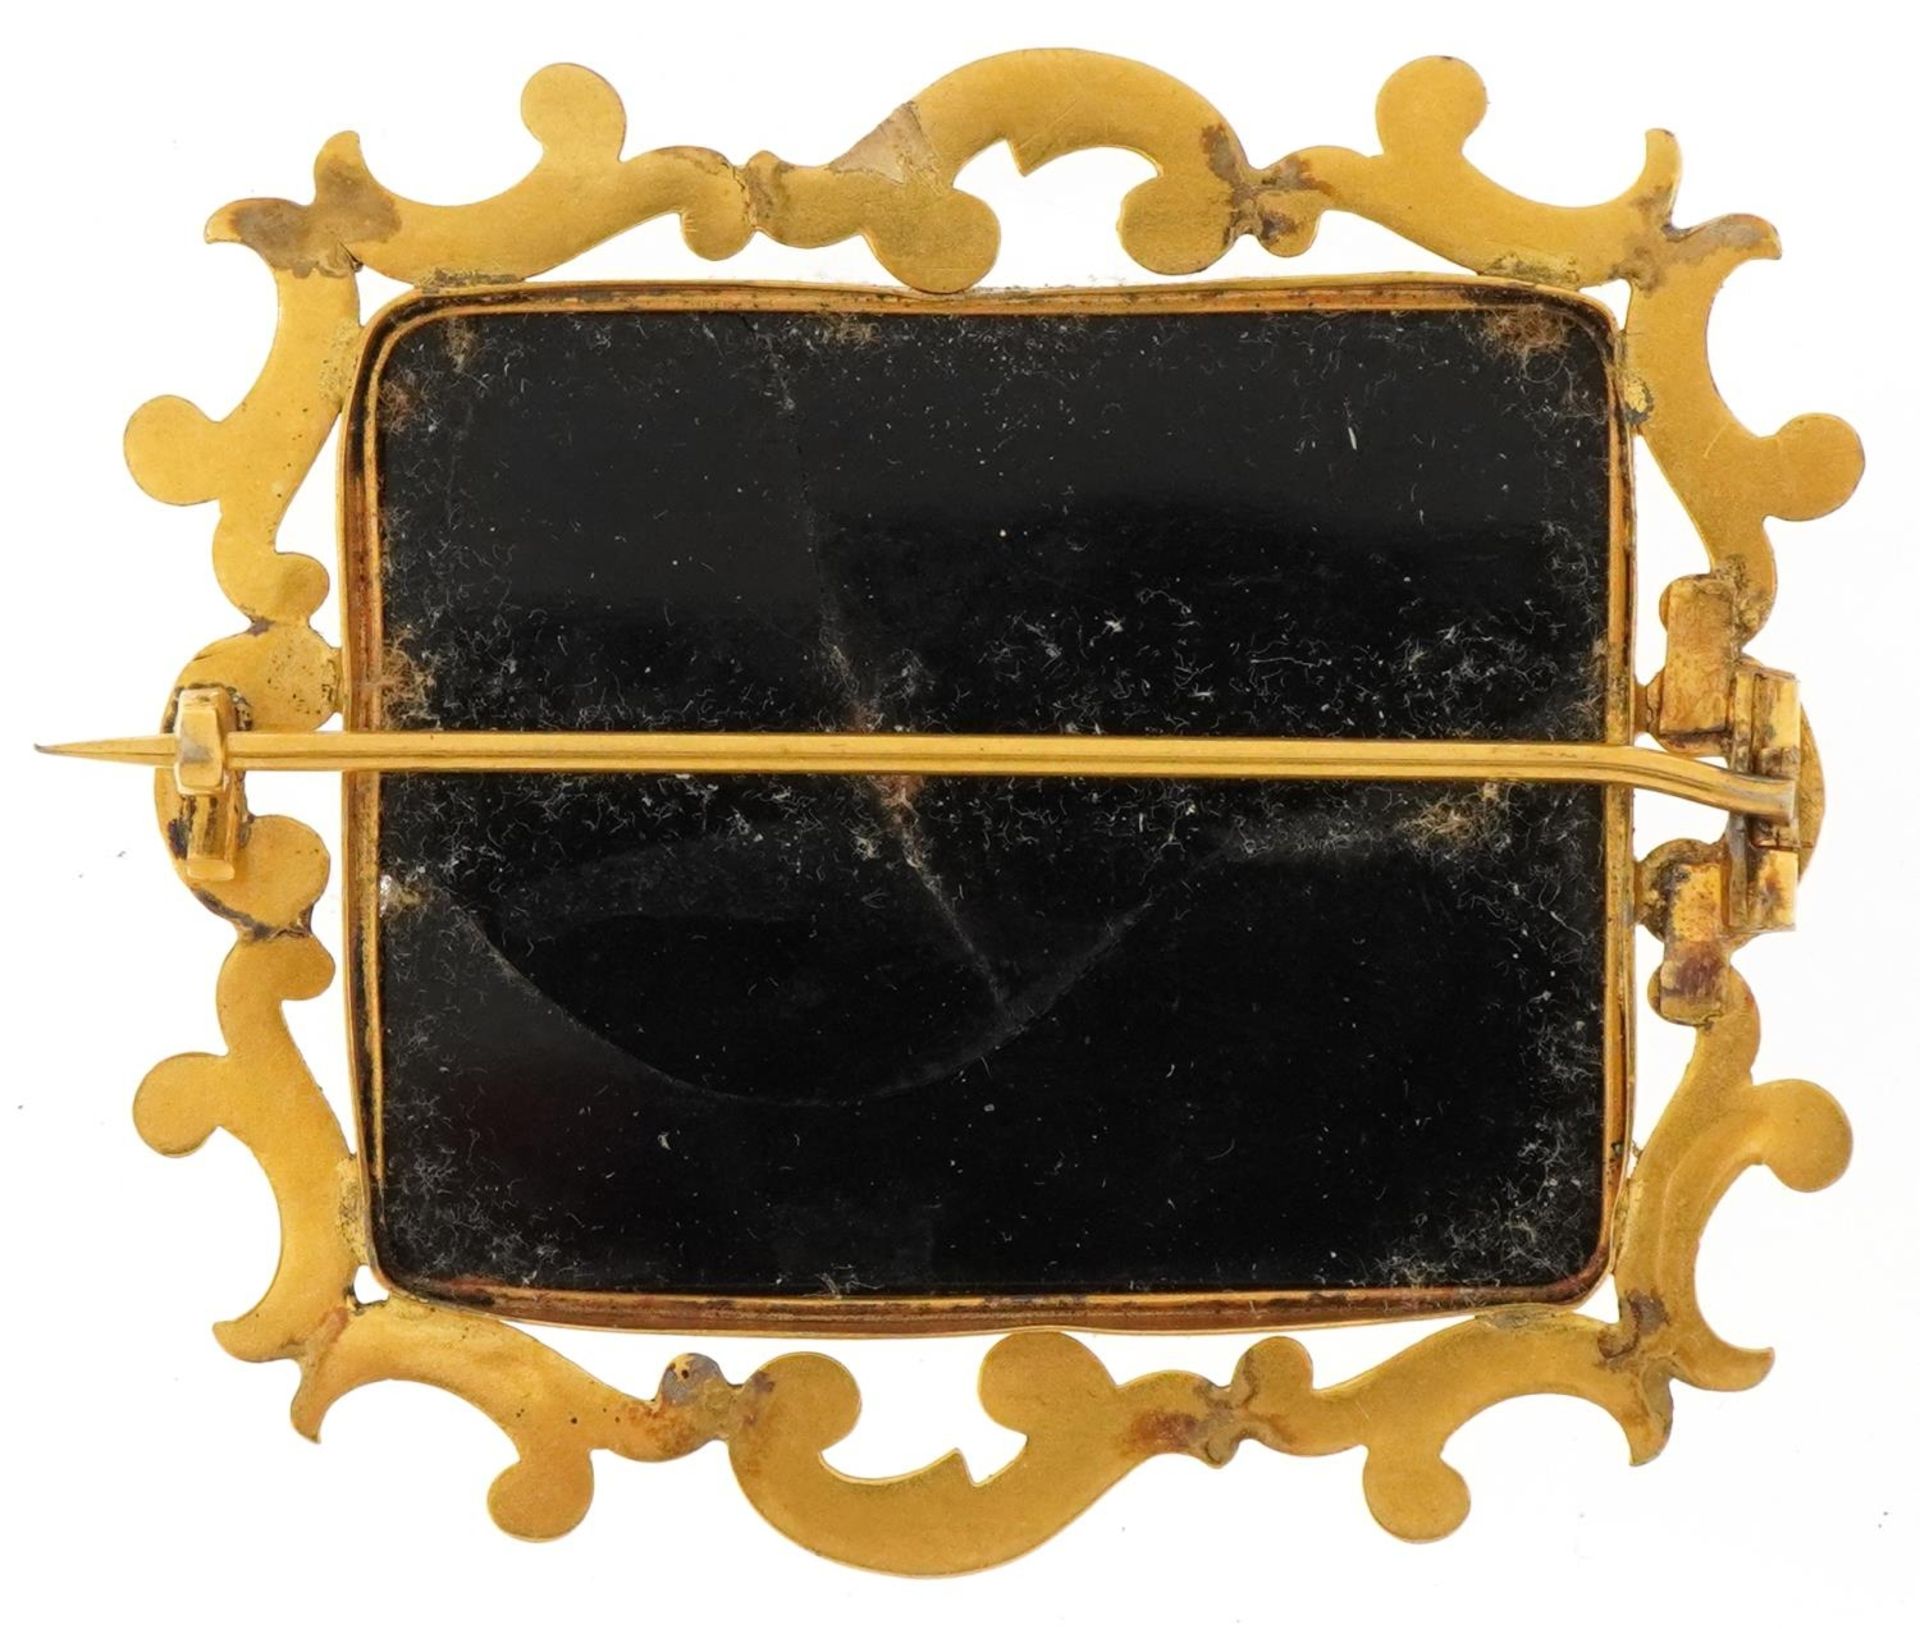 Italian 19th century pietra dura brooch with yellow metal mount decorated with birds around a - Image 2 of 2